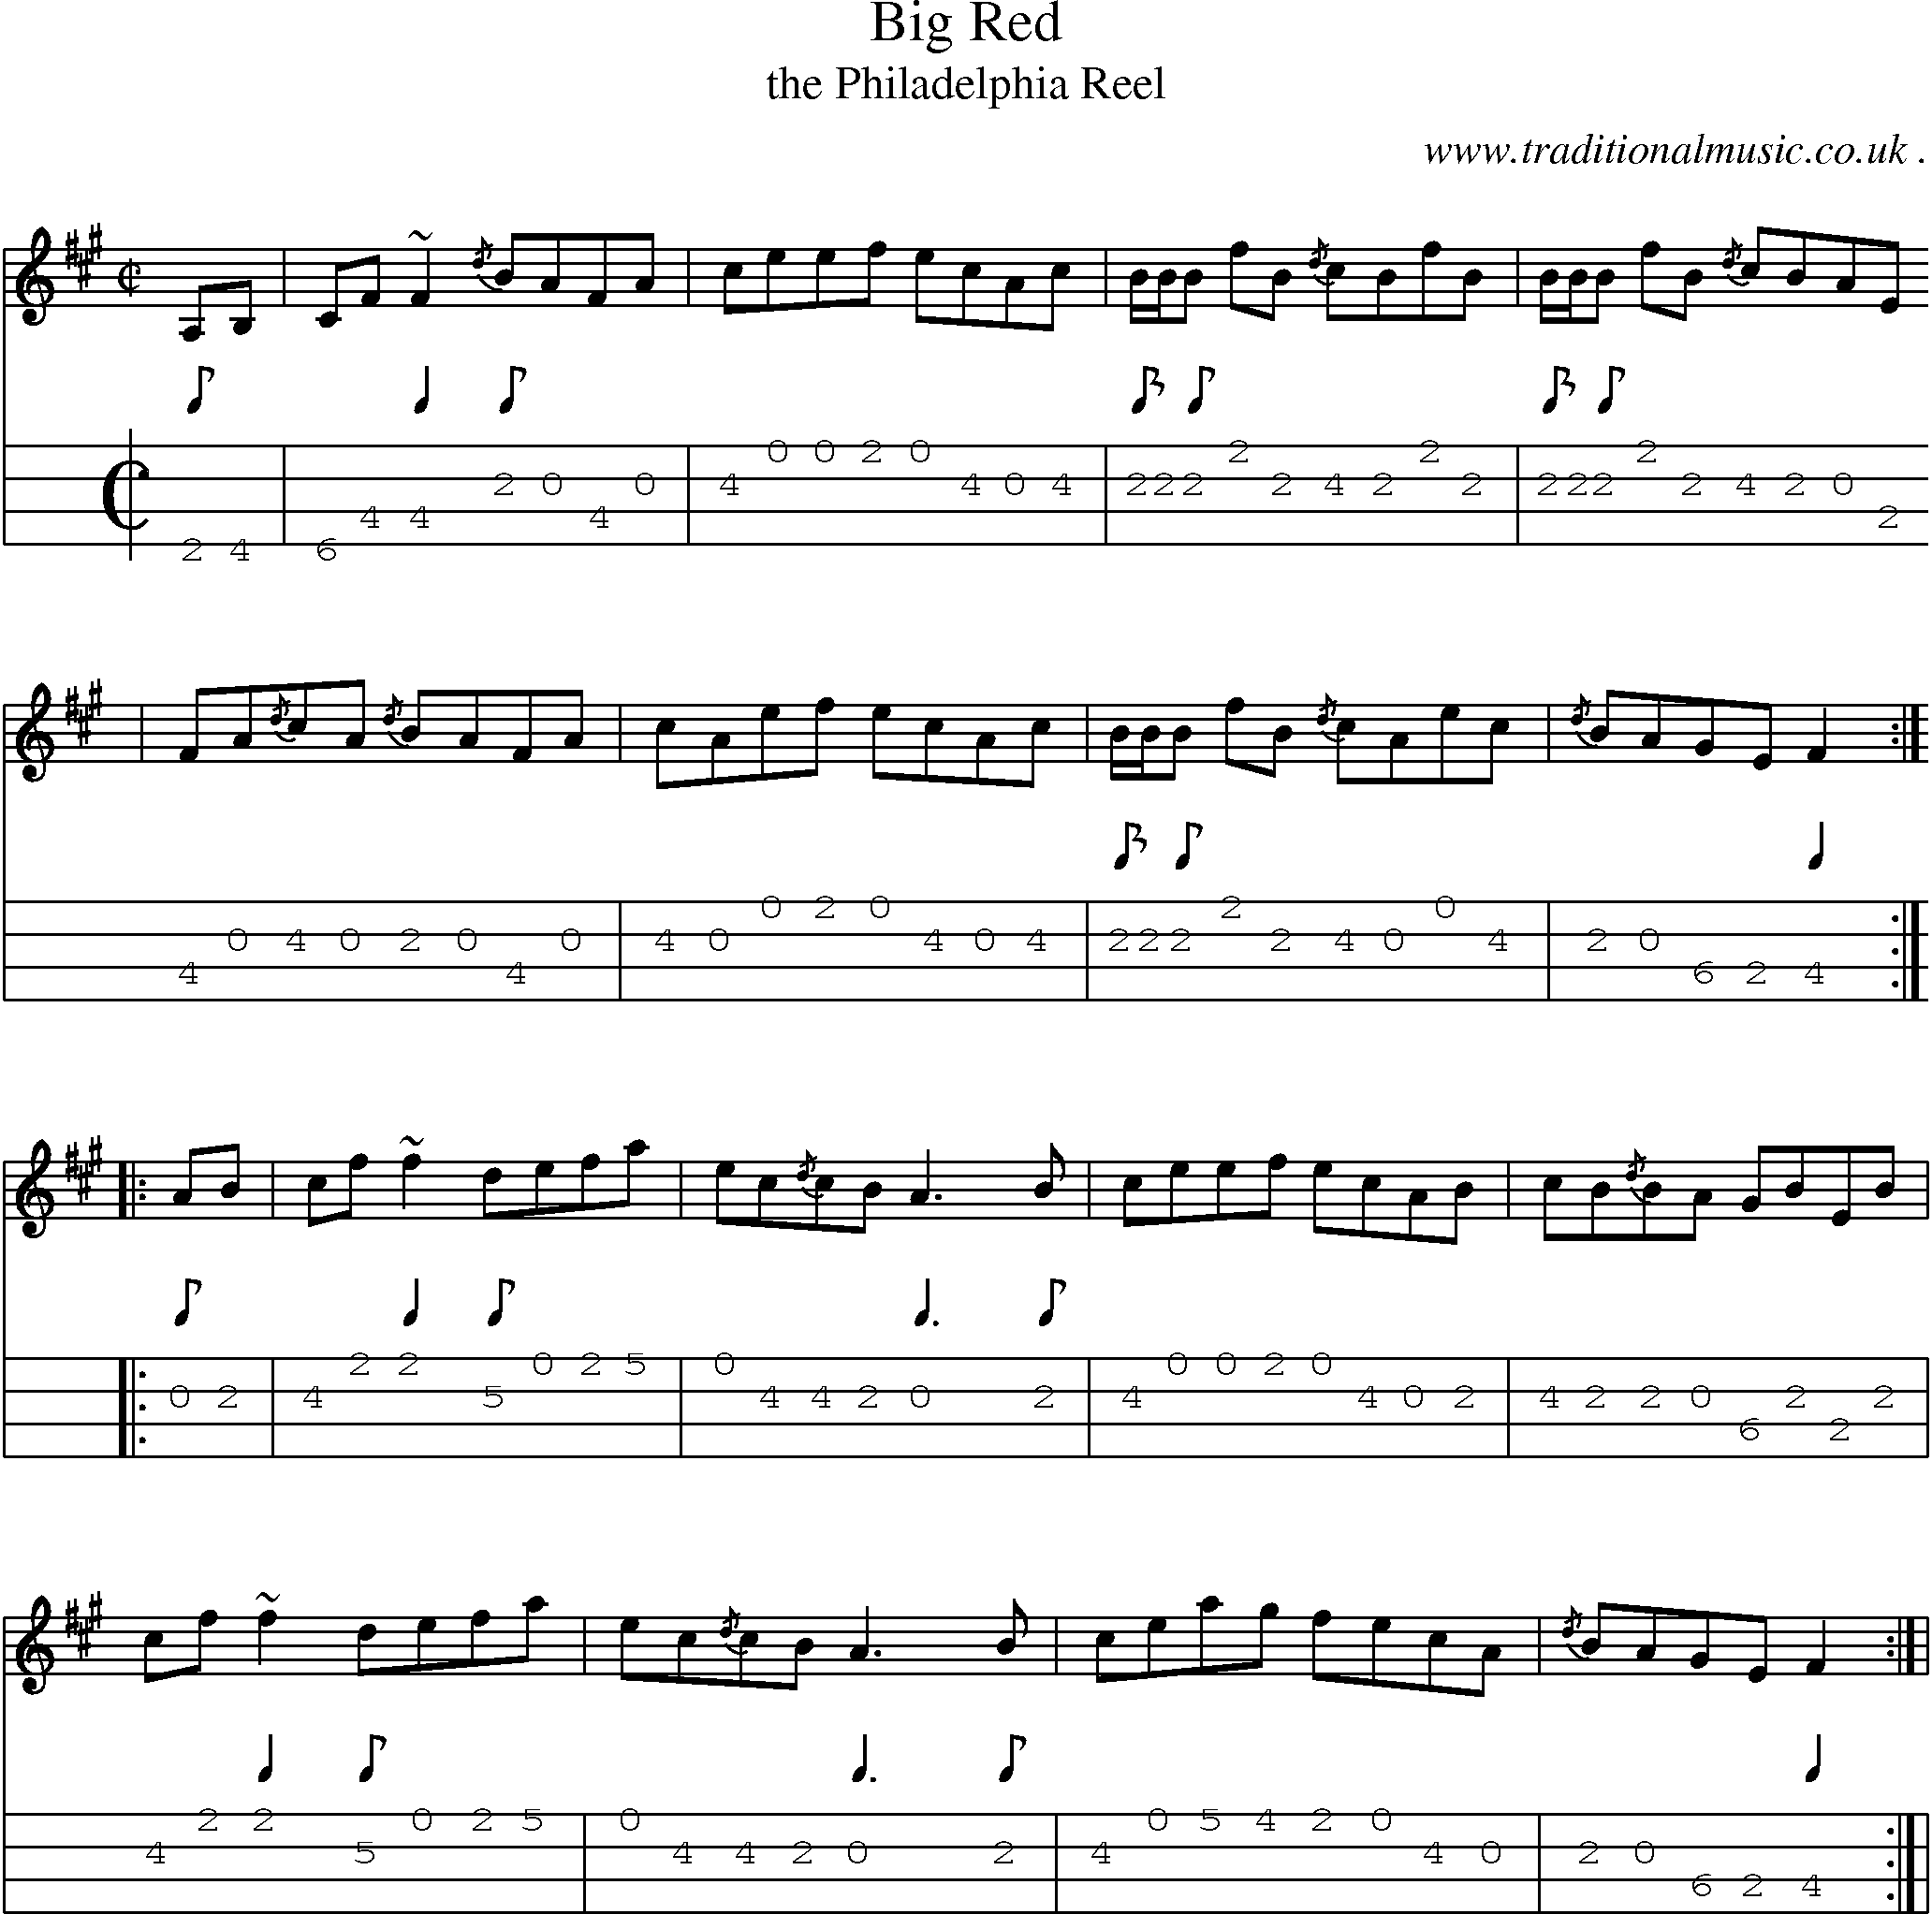 Sheet-music  score, Chords and Mandolin Tabs for Big Red